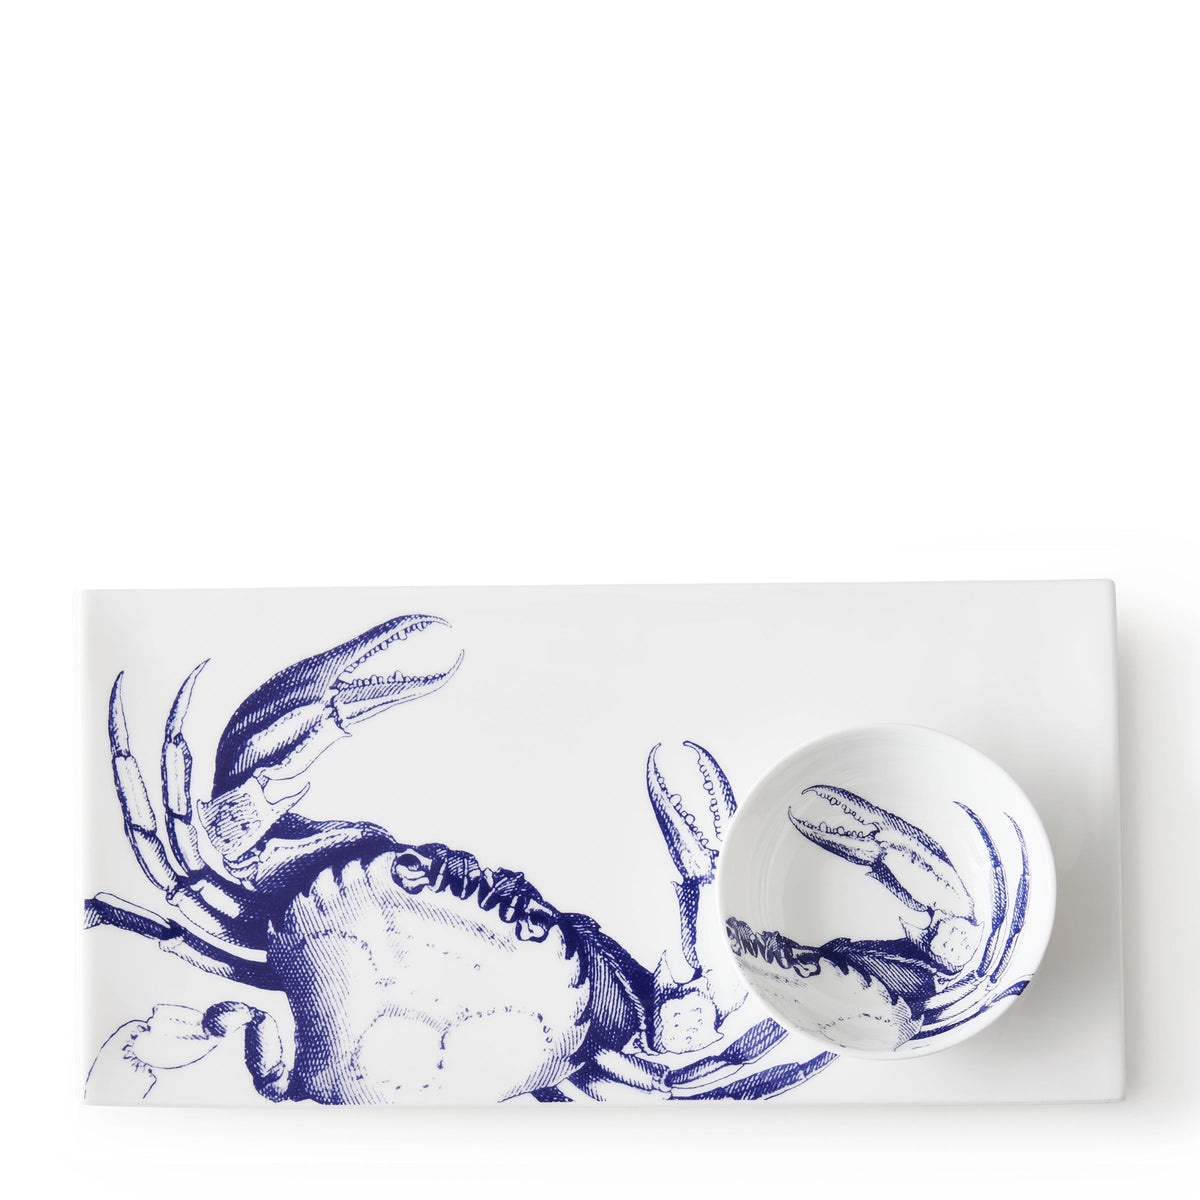 A blue and white Crab Sushi Tray Large bone china plate with a crab on it by Caskata.